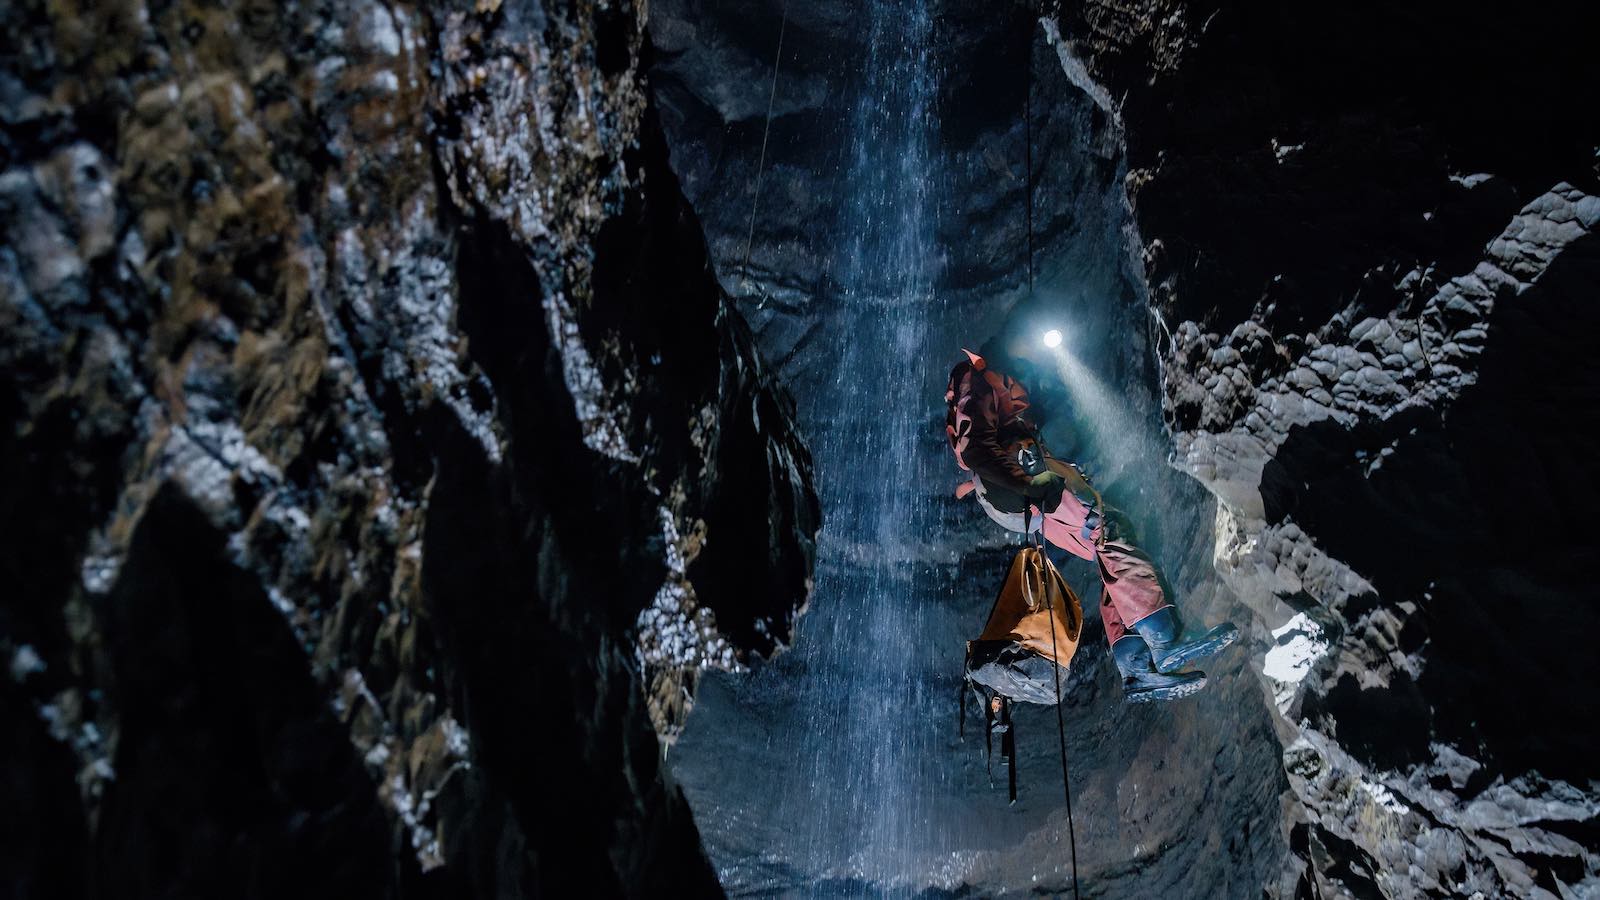 A person in a red jumpsuit and black calf-length boots rappels beside an underground waterfall. An orange rucksack is attached to their black ropes and their headlamp shines downward to the right of the frame. The person is framed by craggy vertical faces of dark rock on all sides.